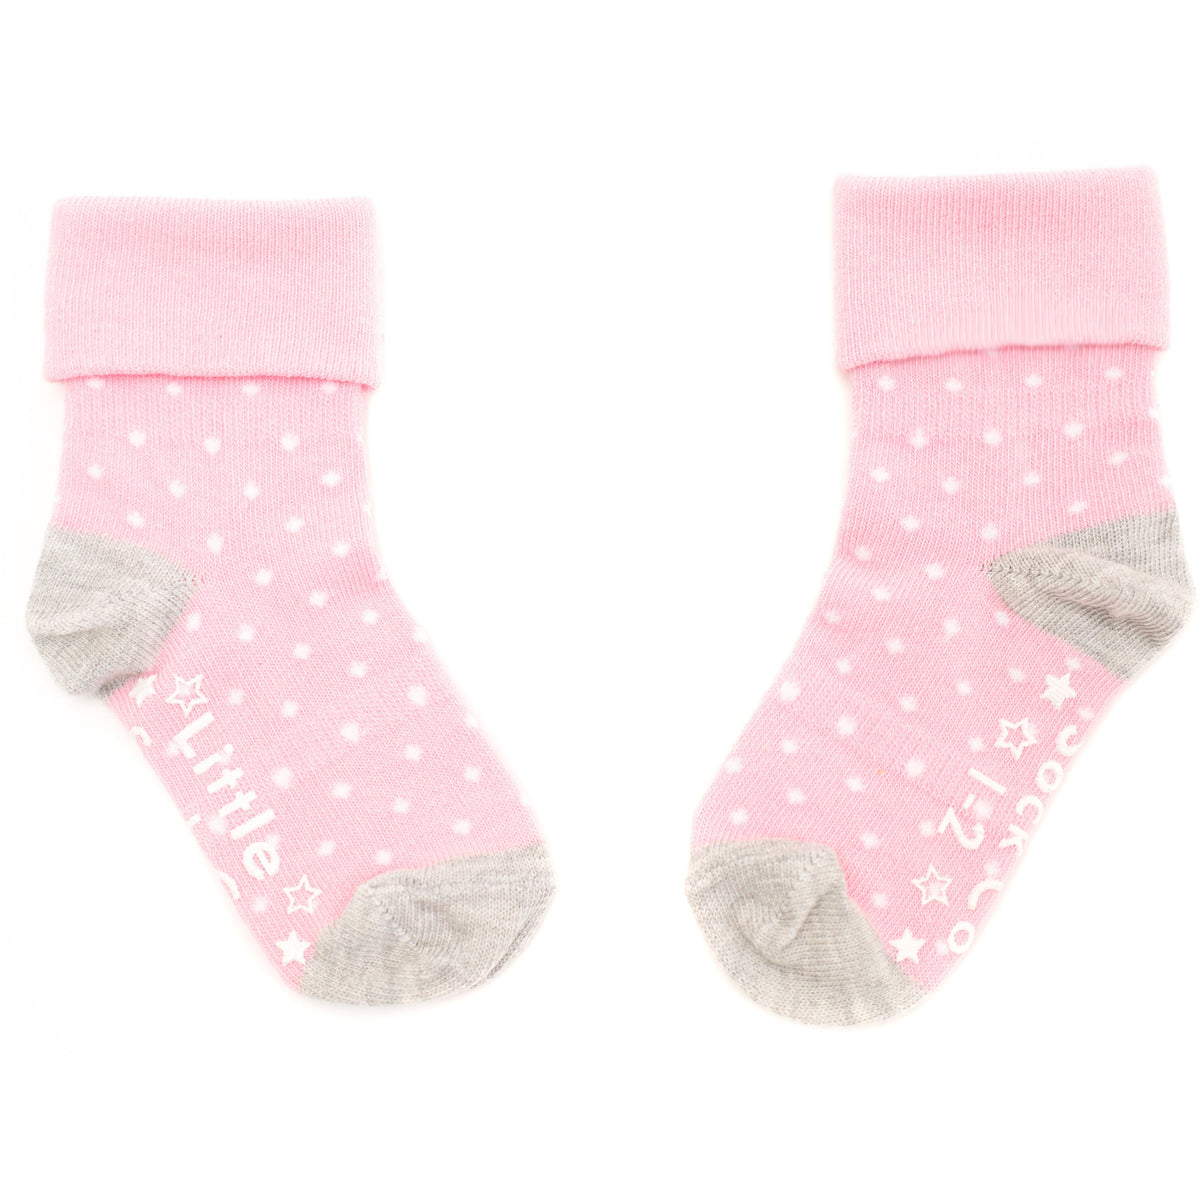 Non-Slip Stay on Baby and Toddler Socks - 5 Pack in Soft Pink & White